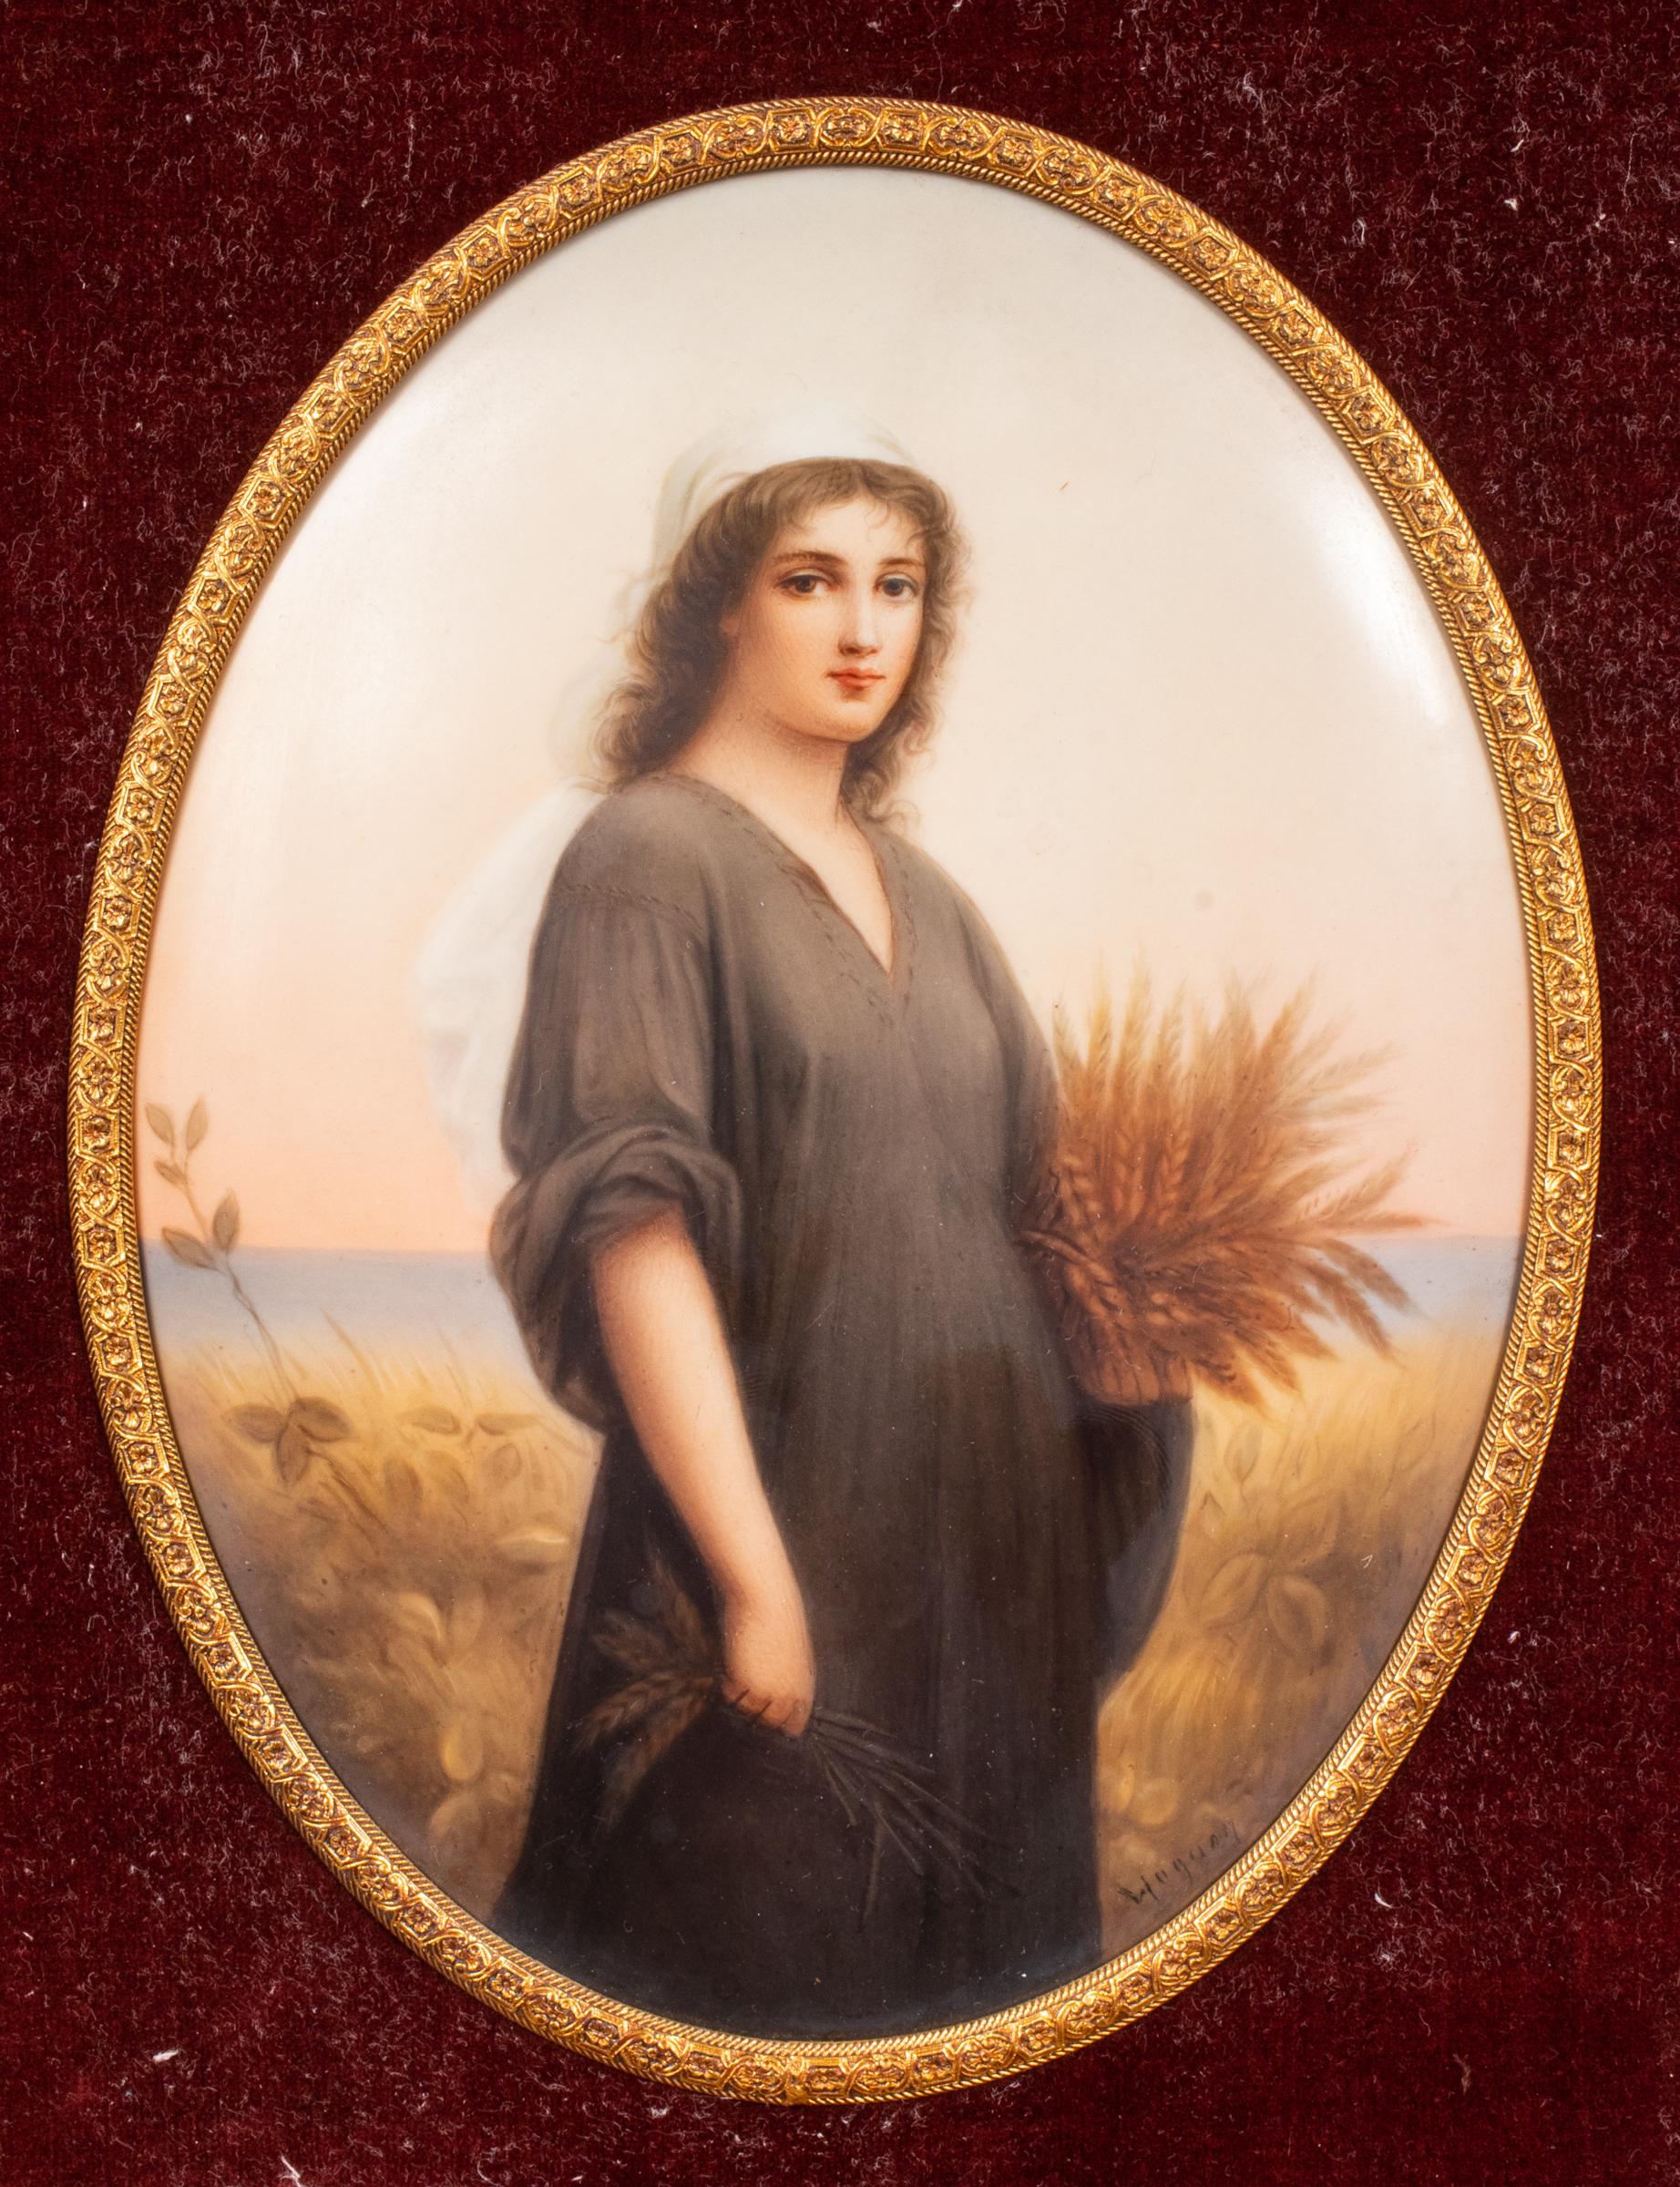 19th century Continental hand painted porcelain plaque, signed in the lower left corner: 